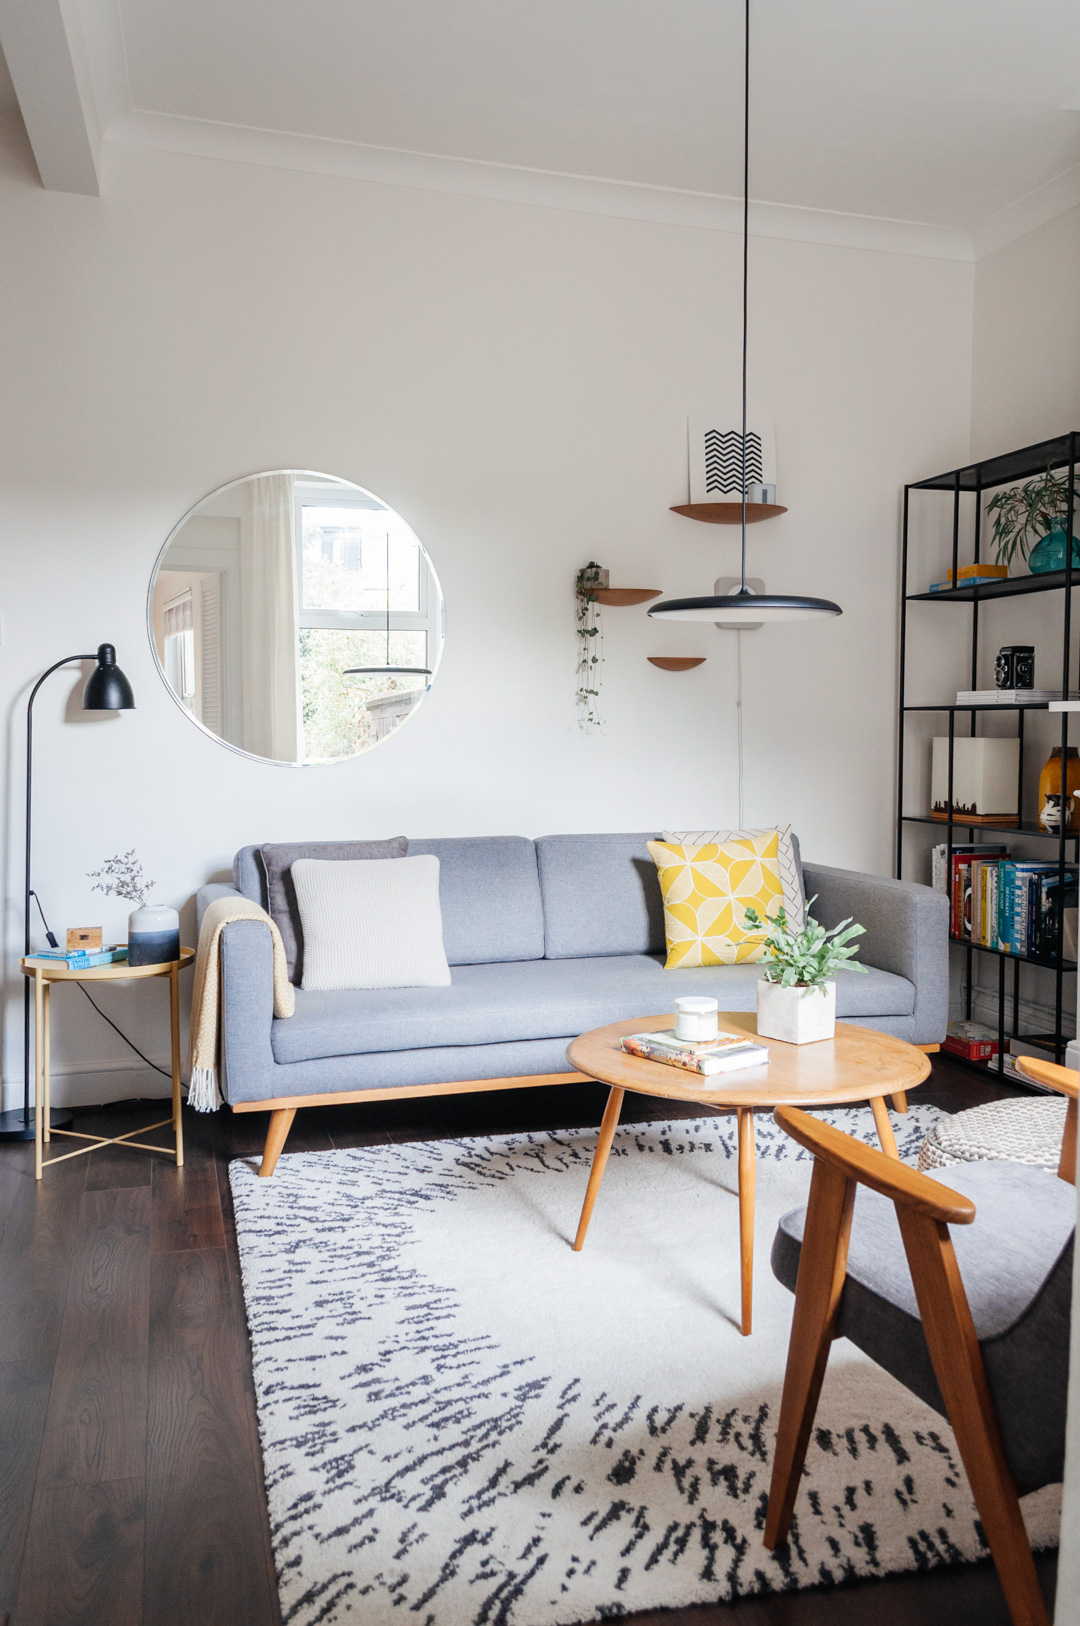 Before After Contemporary Mid-century Modern Summer Living Room Makeover Reveal Boreal Abode-12